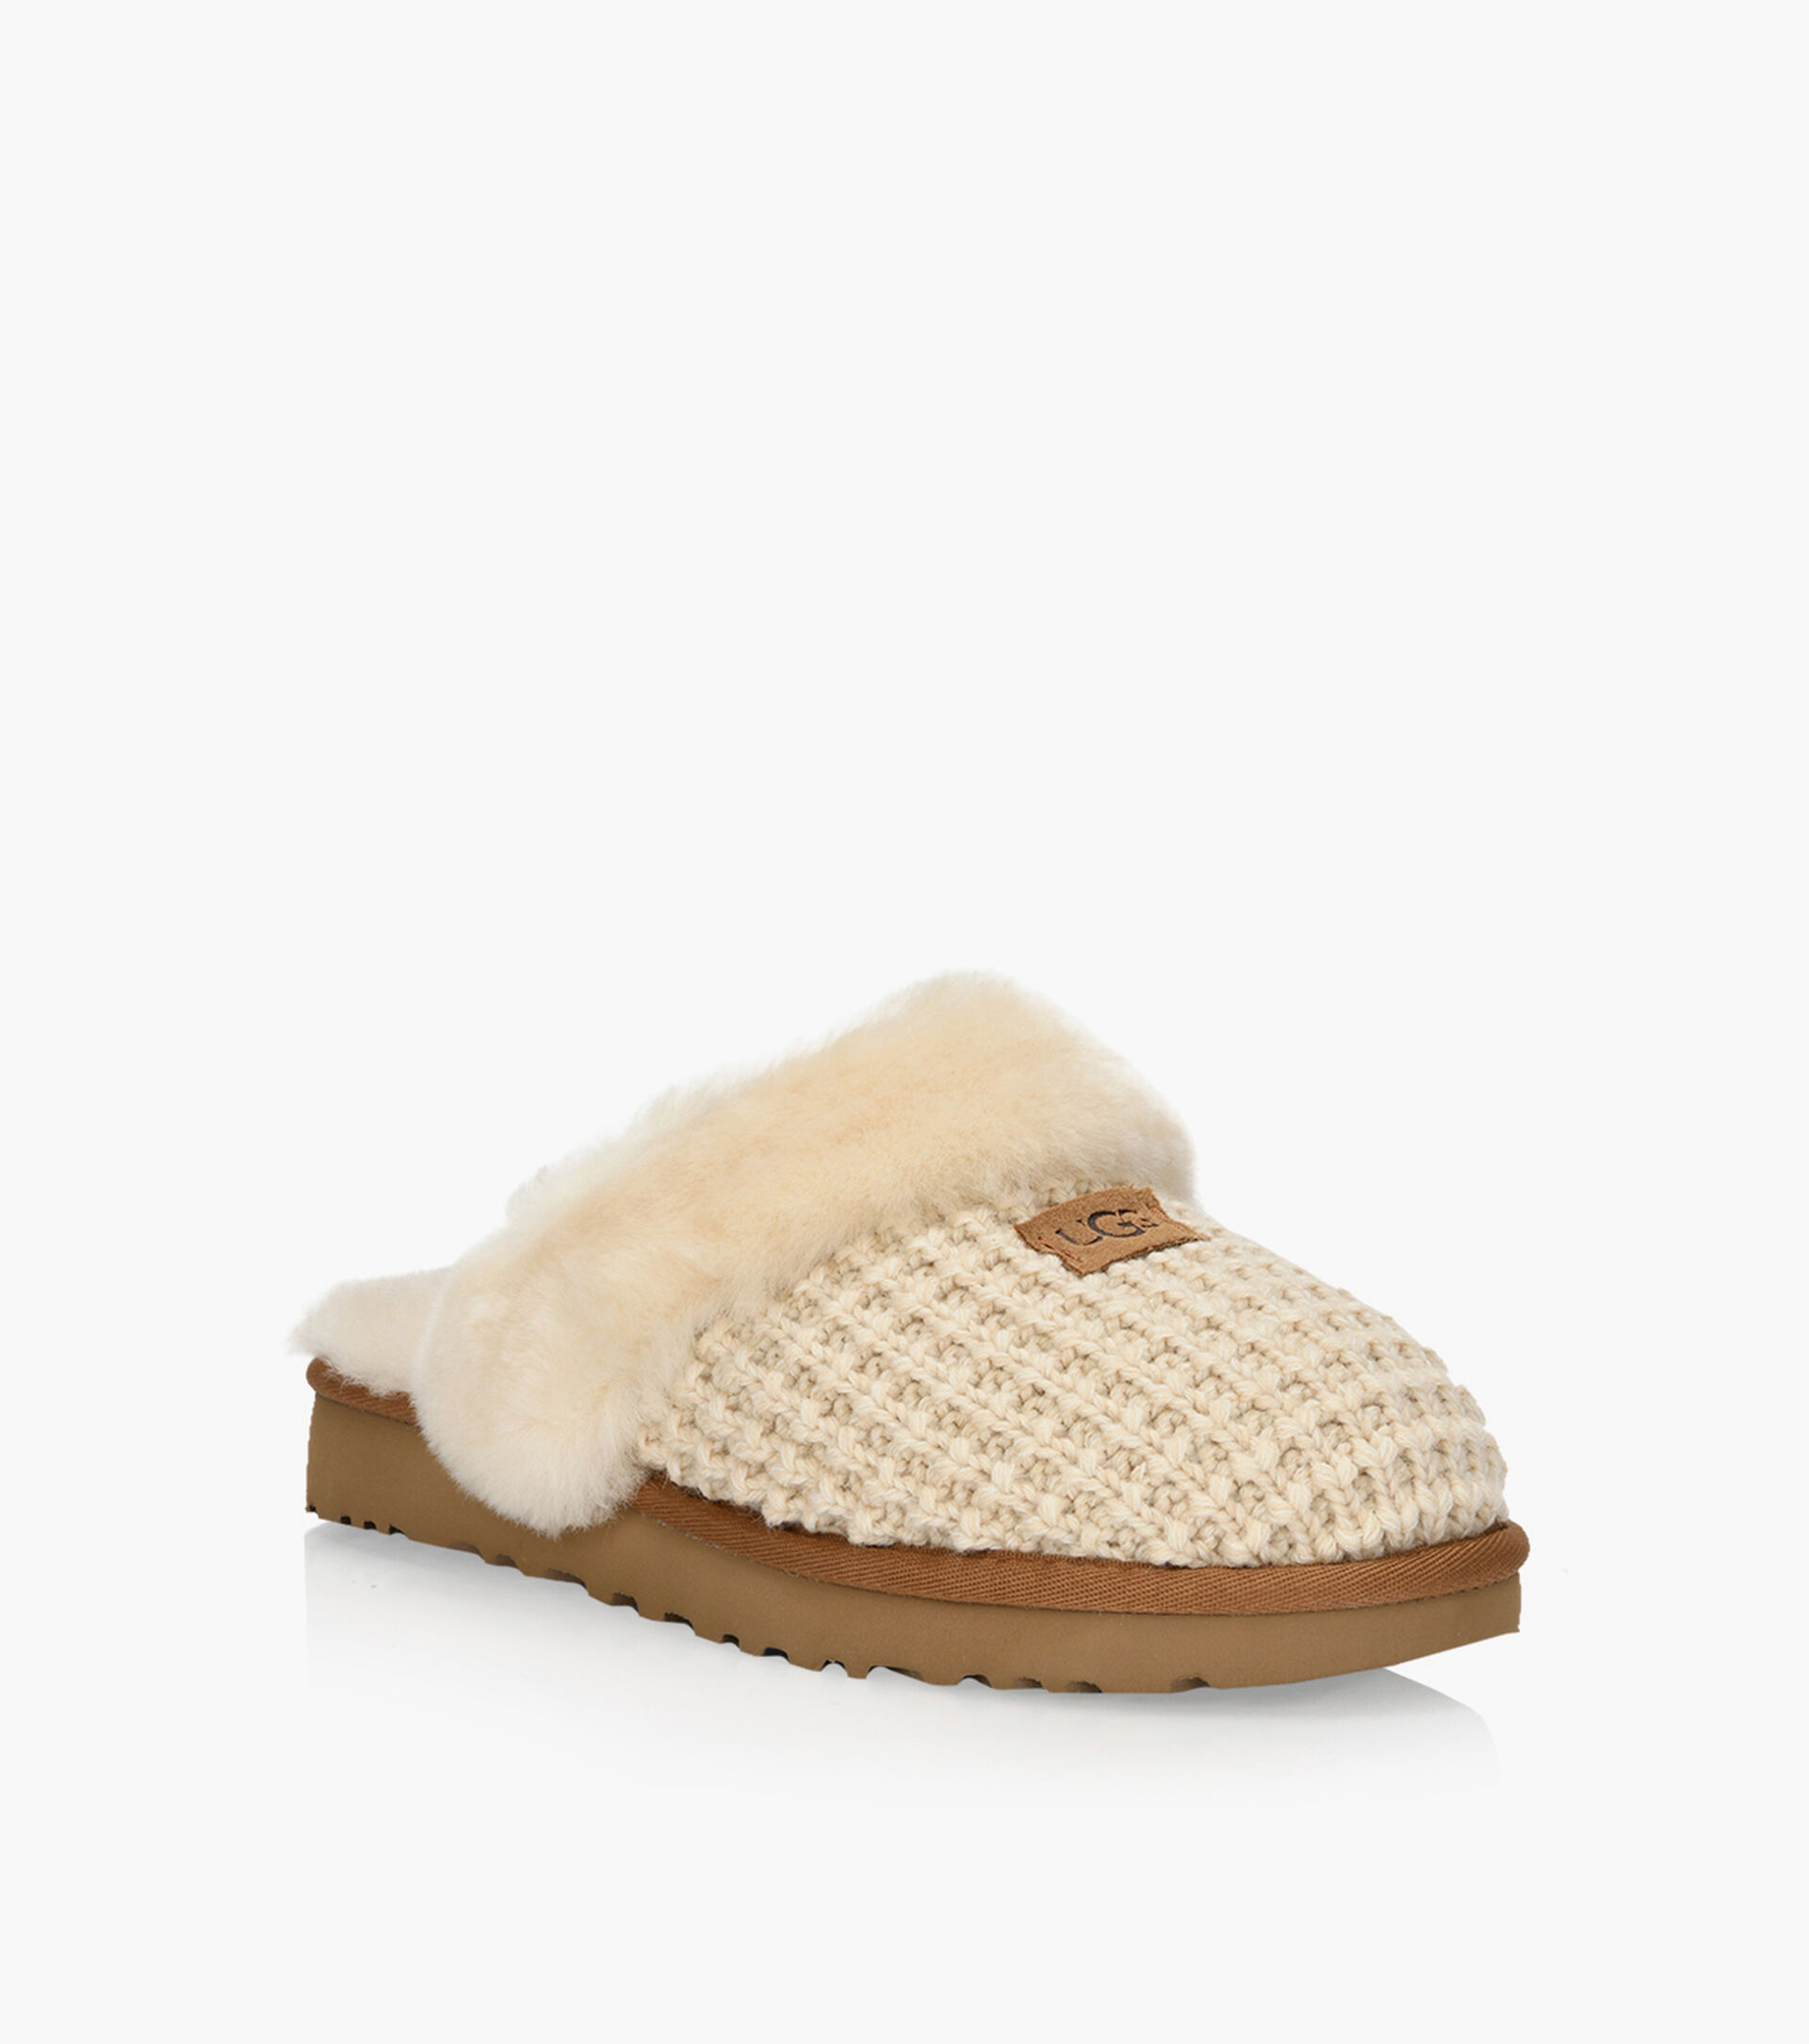 UGG COZY SLIPPER - Beige Fabric | Browns Shoes